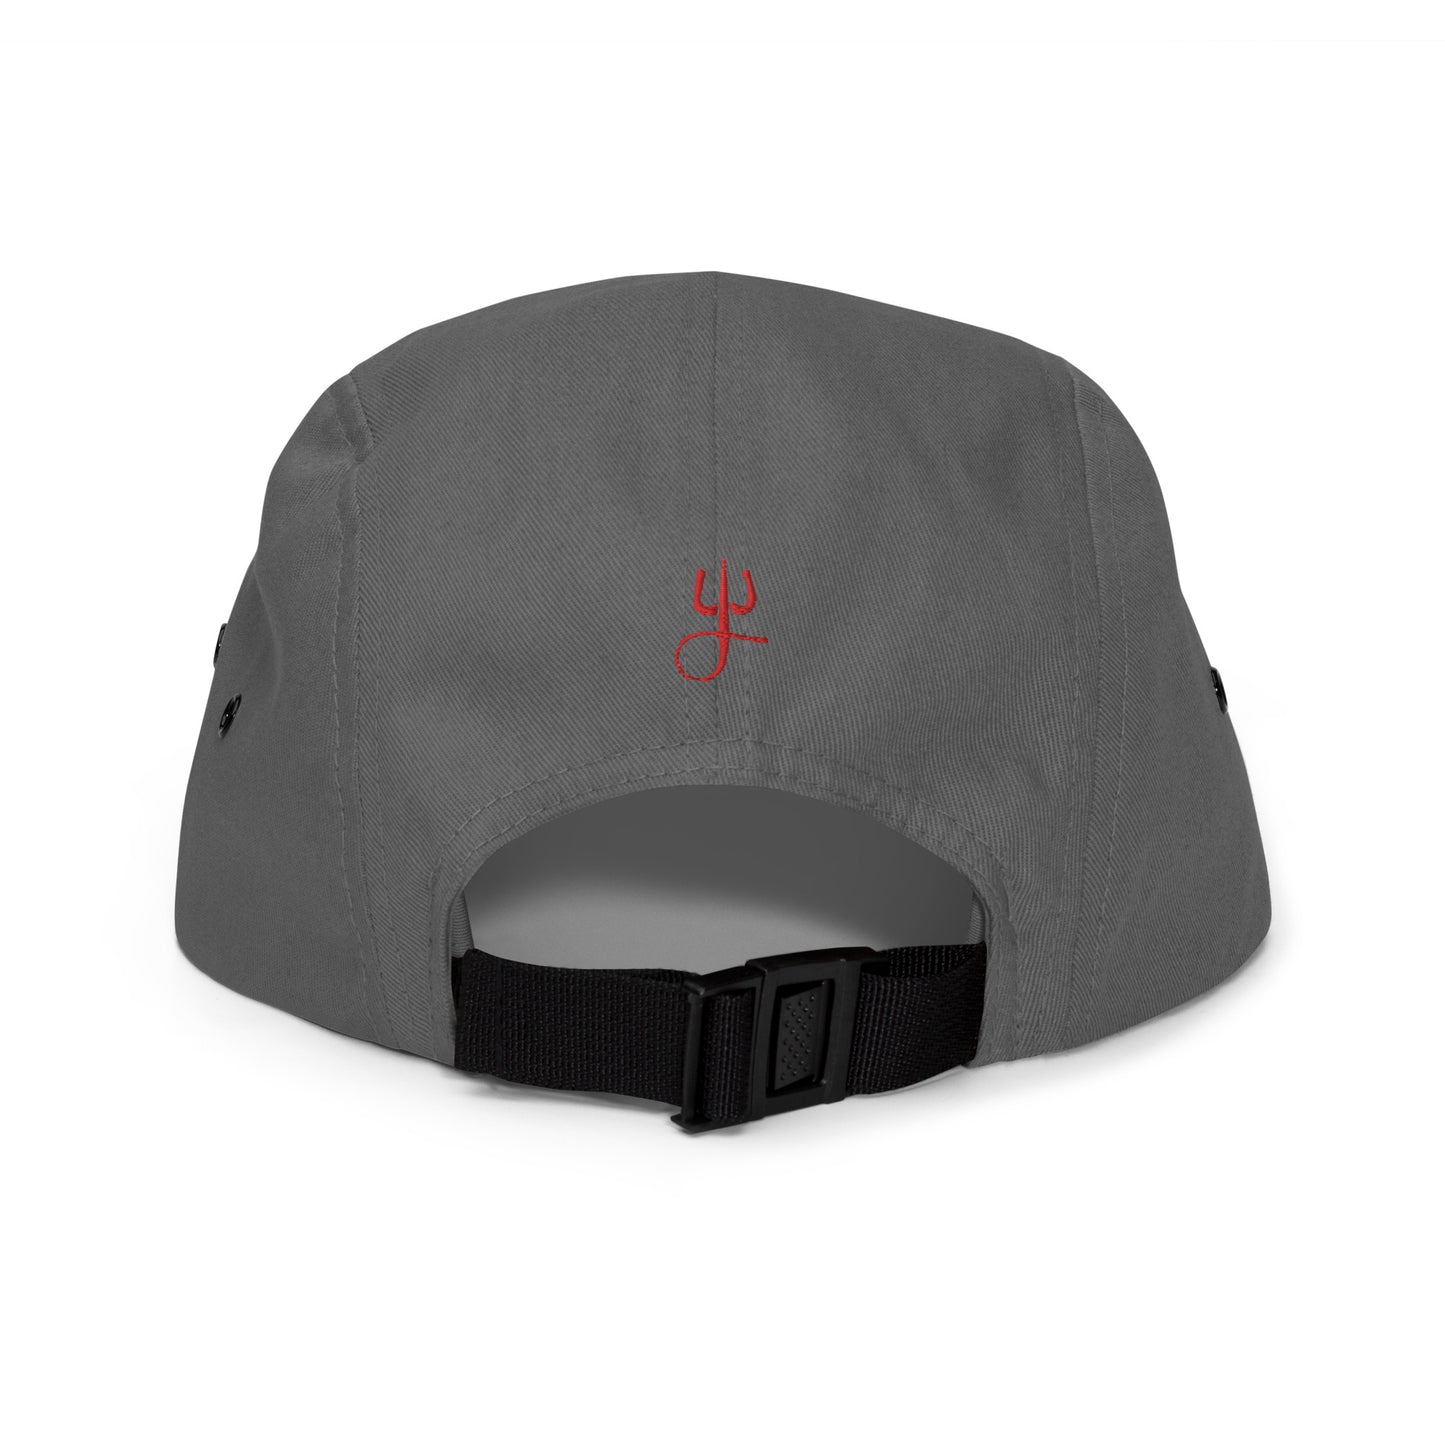 Inferno Five Panel